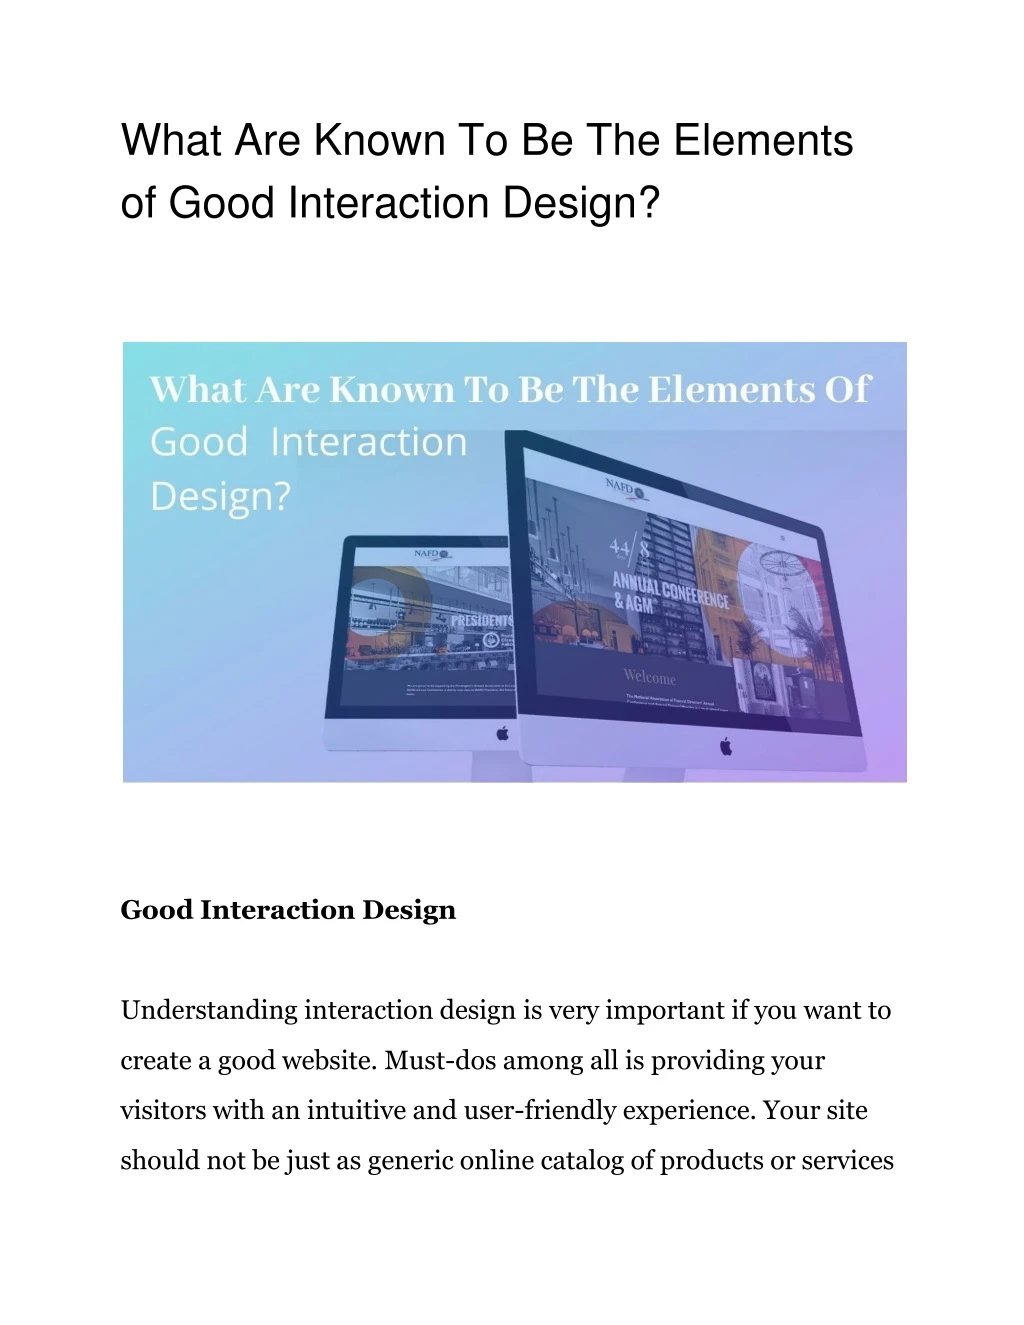 what are known to be the elements of good interaction design